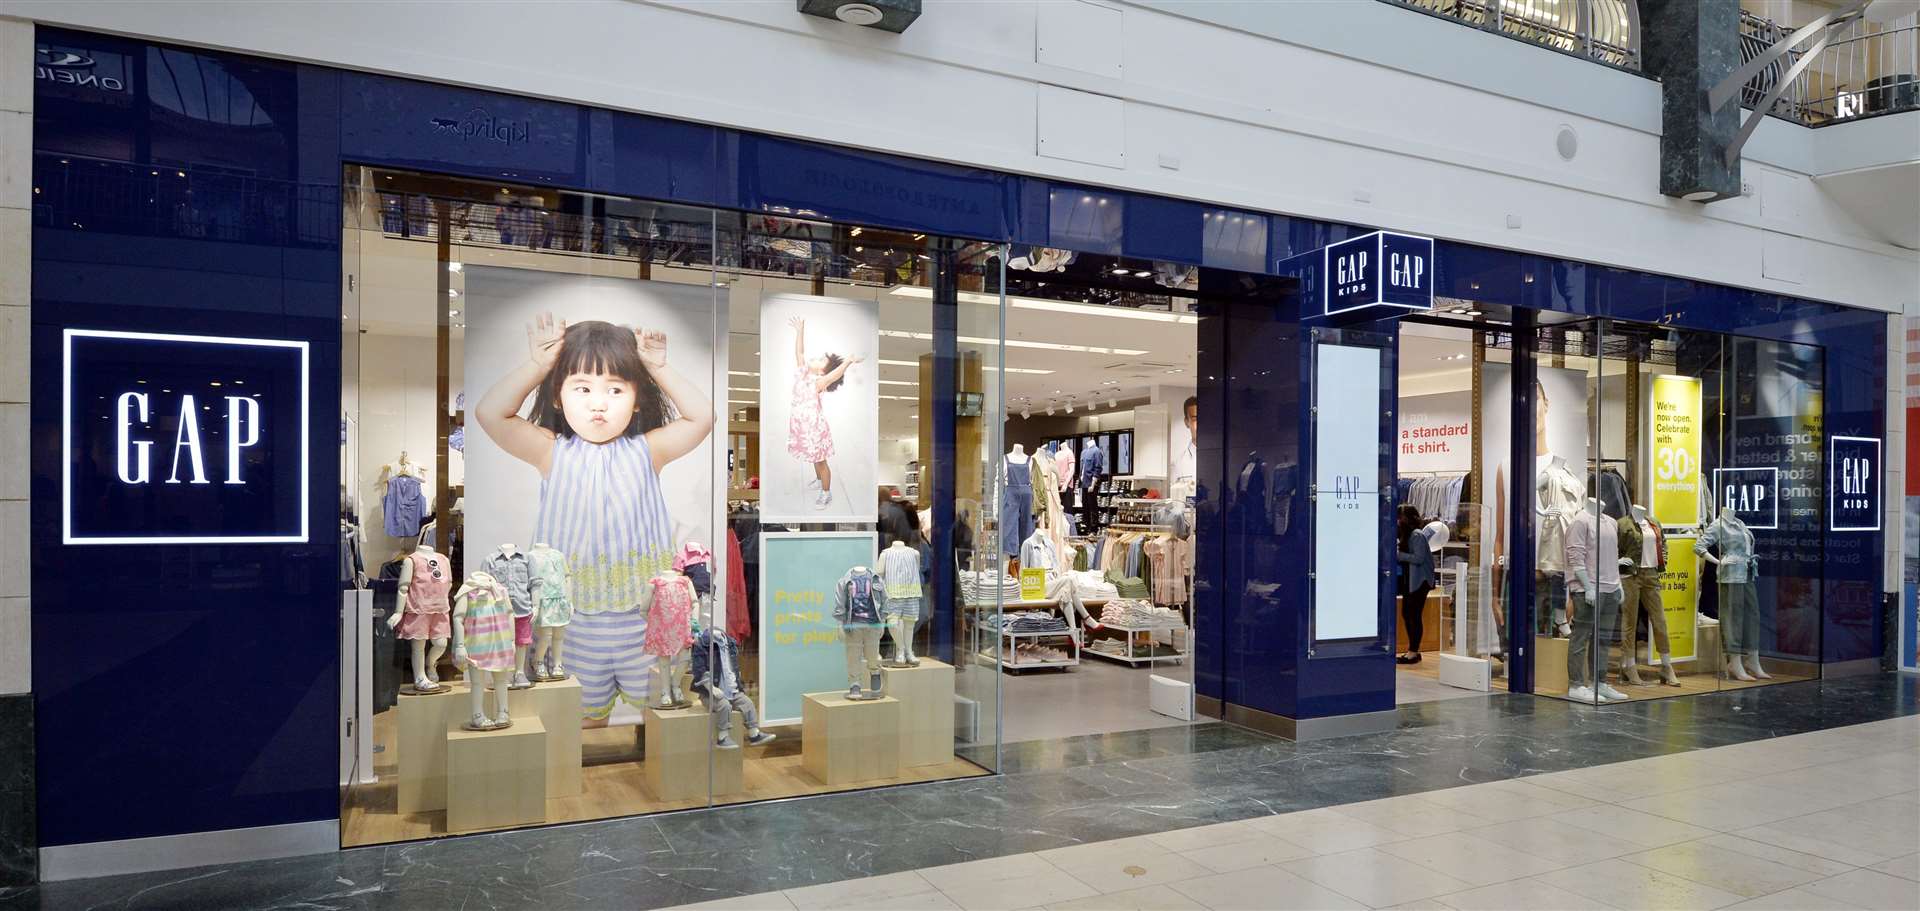 Gap has opened a new revamped store at Bluewater